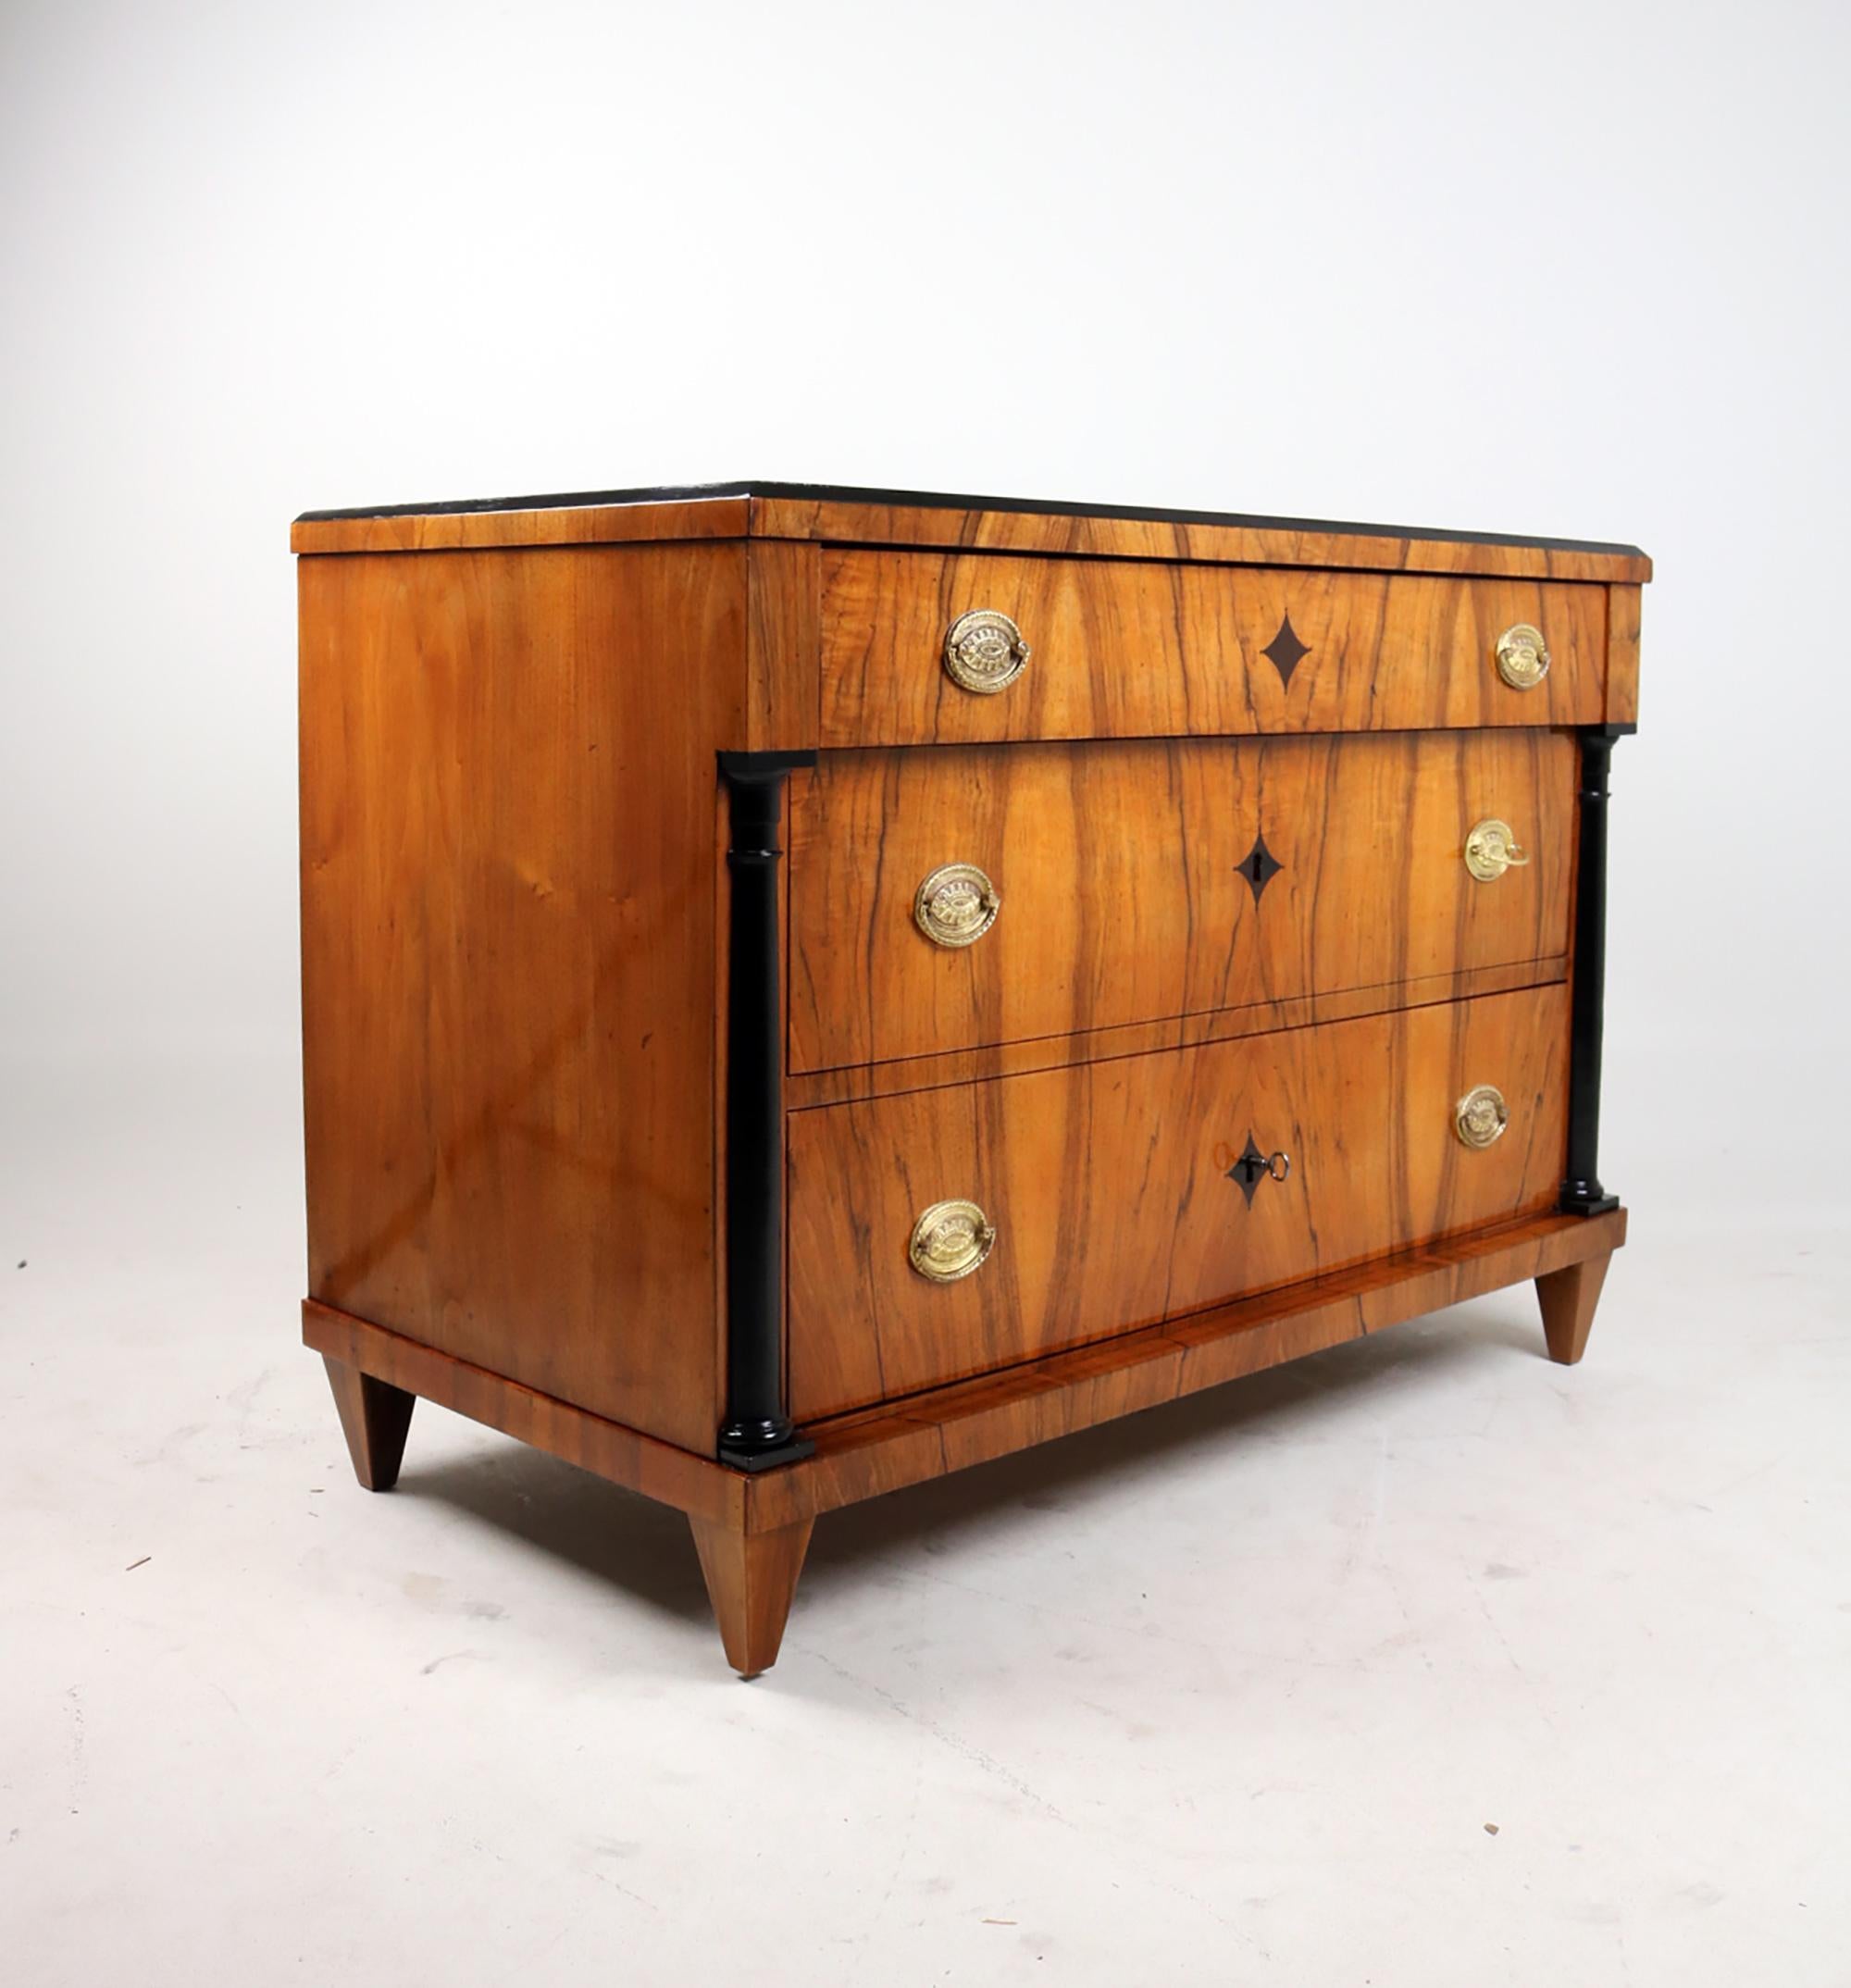 Polished Early Biedermeier Chest of Drawers